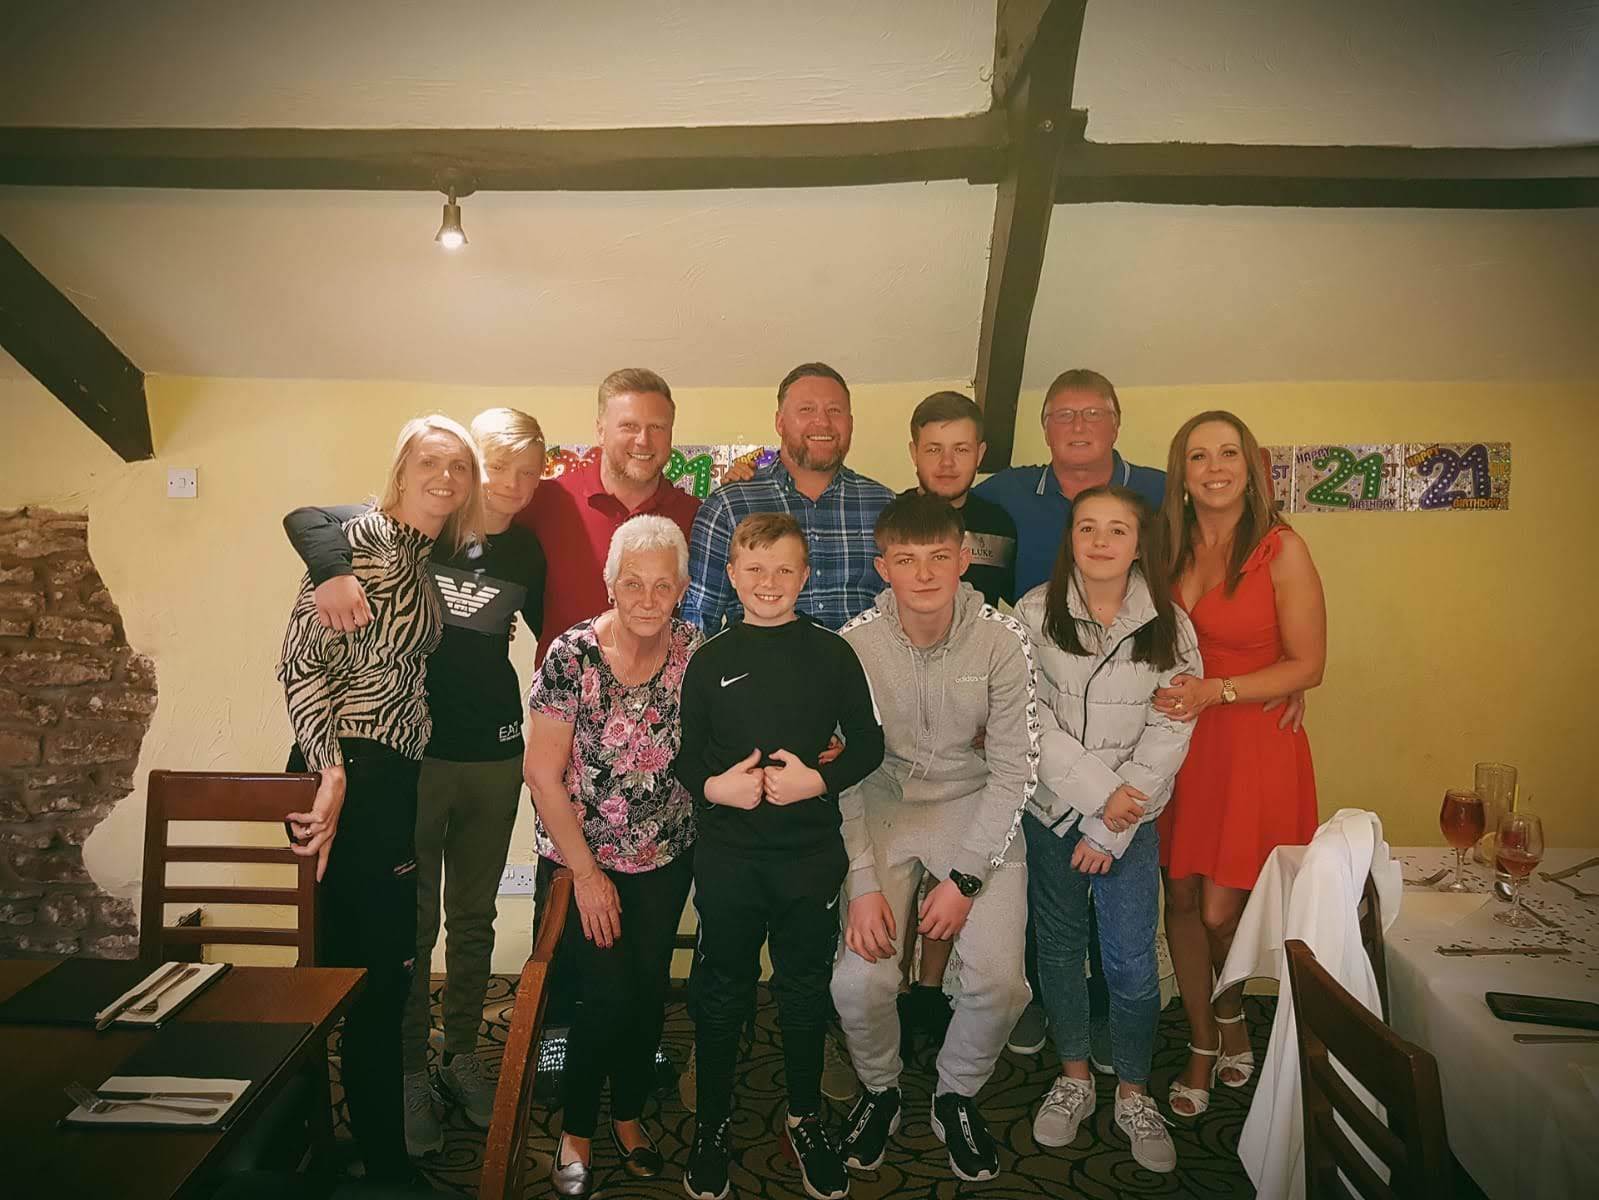 Carl Elshaw, Newport: Happy Mothers Day to our very special Mum and Nanny. Thank you for everything you do for us. All our love Carl, Craig, Rachael, Emma, Ethan, Cody, Evan, Josh, Bel, Tia, Dyllan, Jackson & Molly xxxxxxxxxxxxx